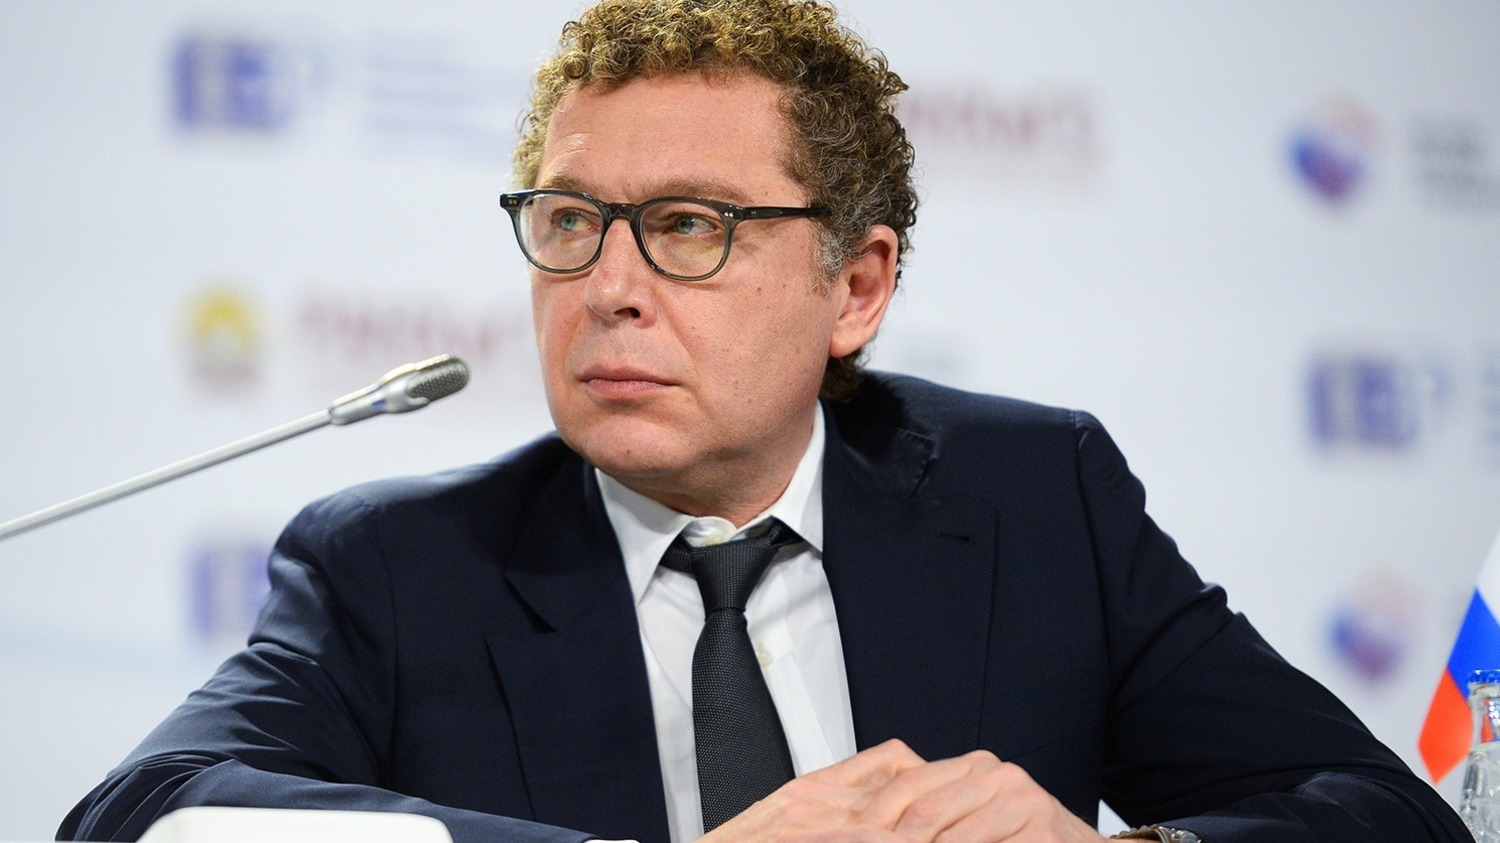 Businessman Alexander Mamut, who left Russia, plans to create a liberal media